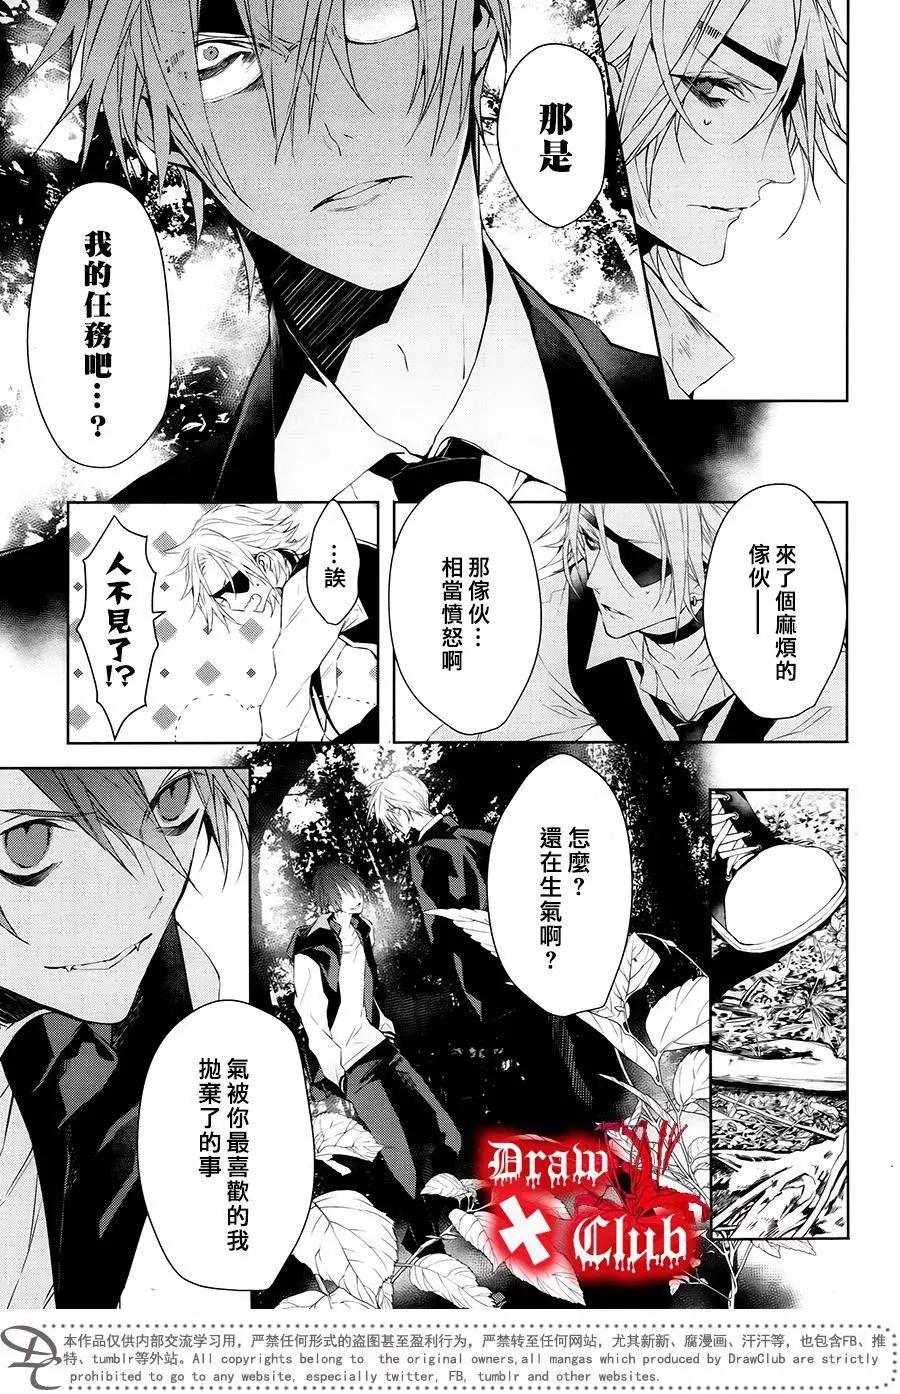 Bloody Mary - 第32回 - 6